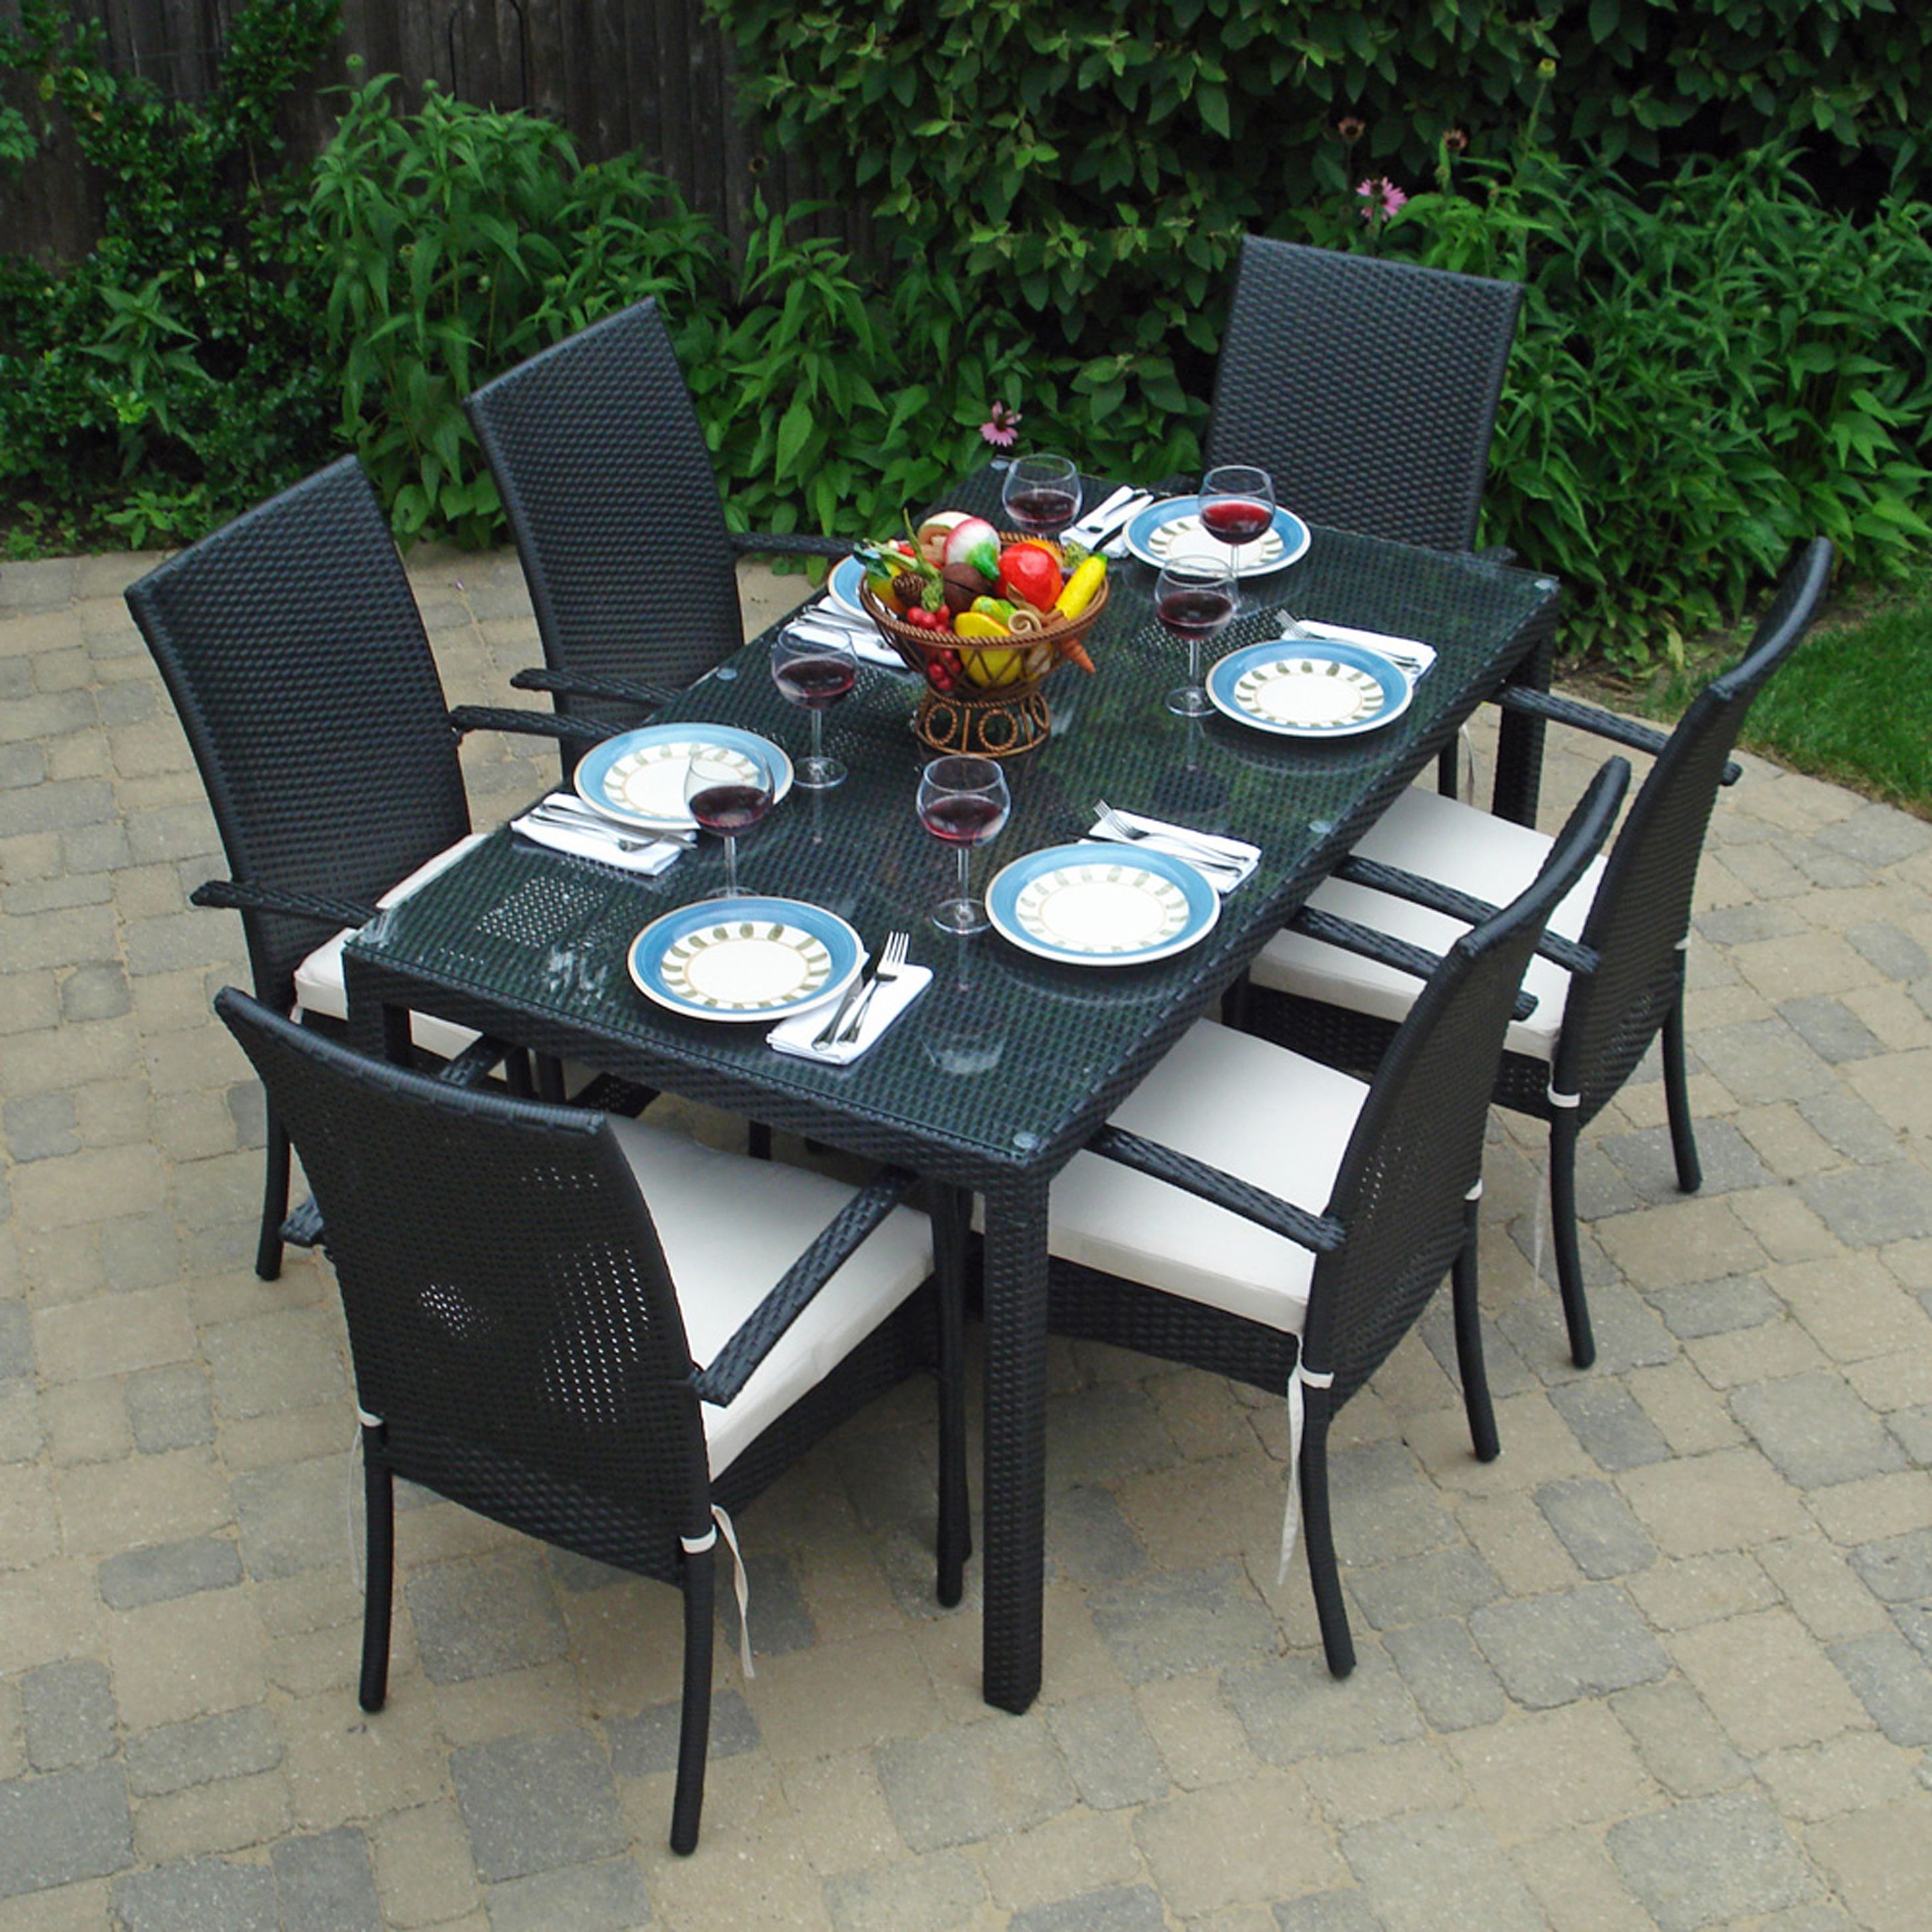 Impressing Modern Outdoor Furniture Design Idea With Rectangular Black Dining Table And Black Chairs Attractive Modern Outdoor Furniture Design Ideas (View 26 of 28)